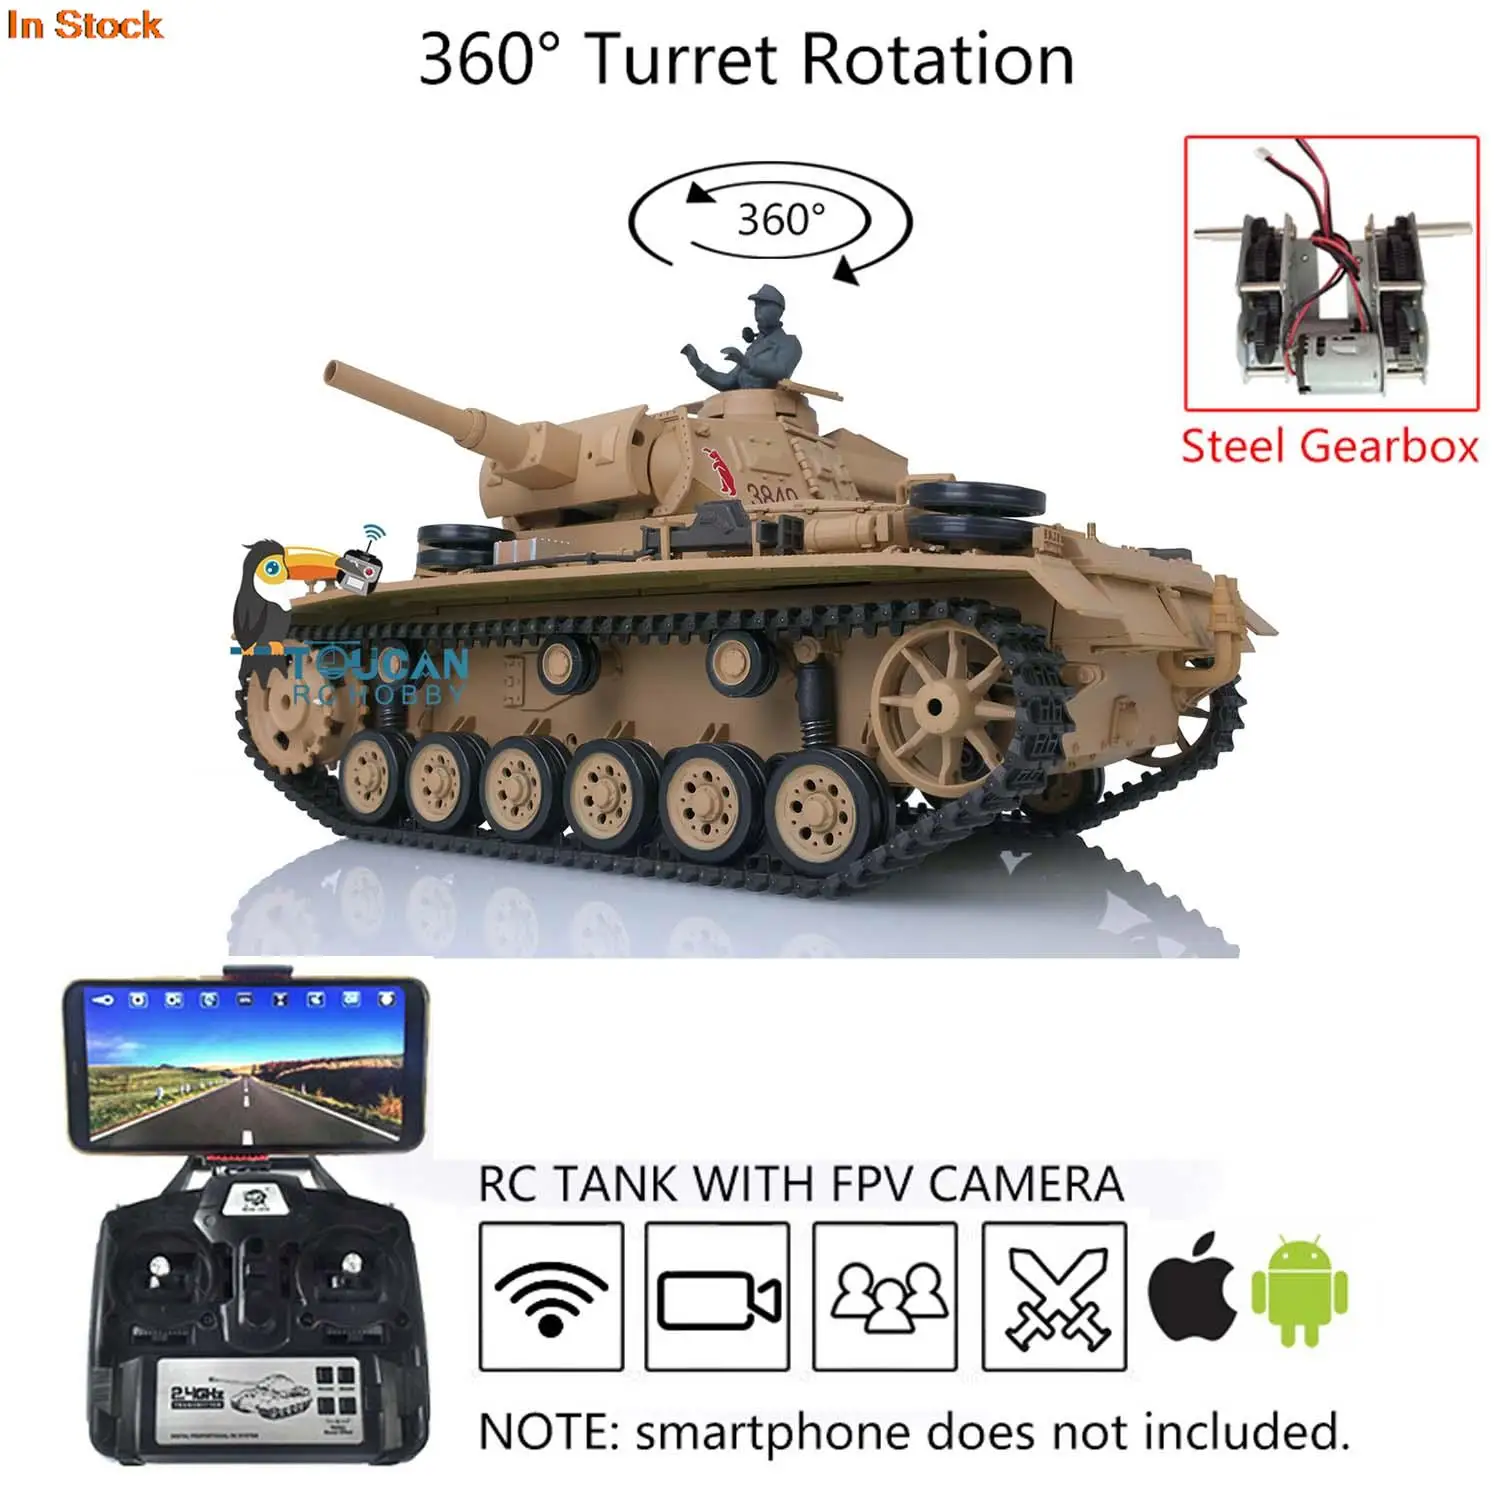 

HENG LONG 1/16 7.0 Plastic Panzer III H FPV Camera RC Tank 3849 Painted Yellow Metal Steel Gearbox 360° Turret Track TH17365